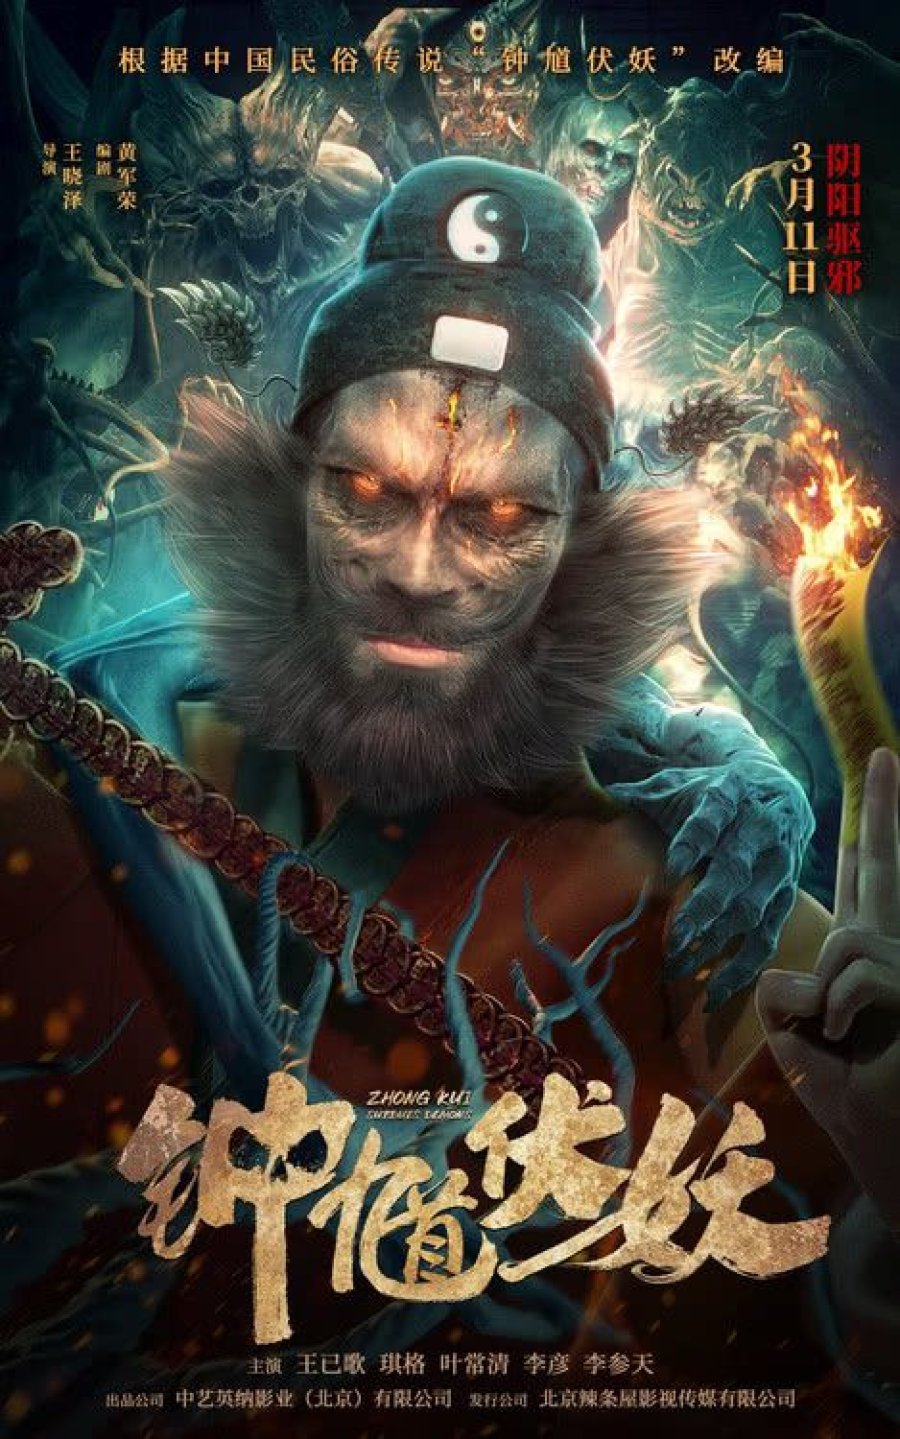 Zhong Kui Subdues Demons (2022) Hindi Dubbed (VoiceOver) 720p HDRip 650MB Free Download